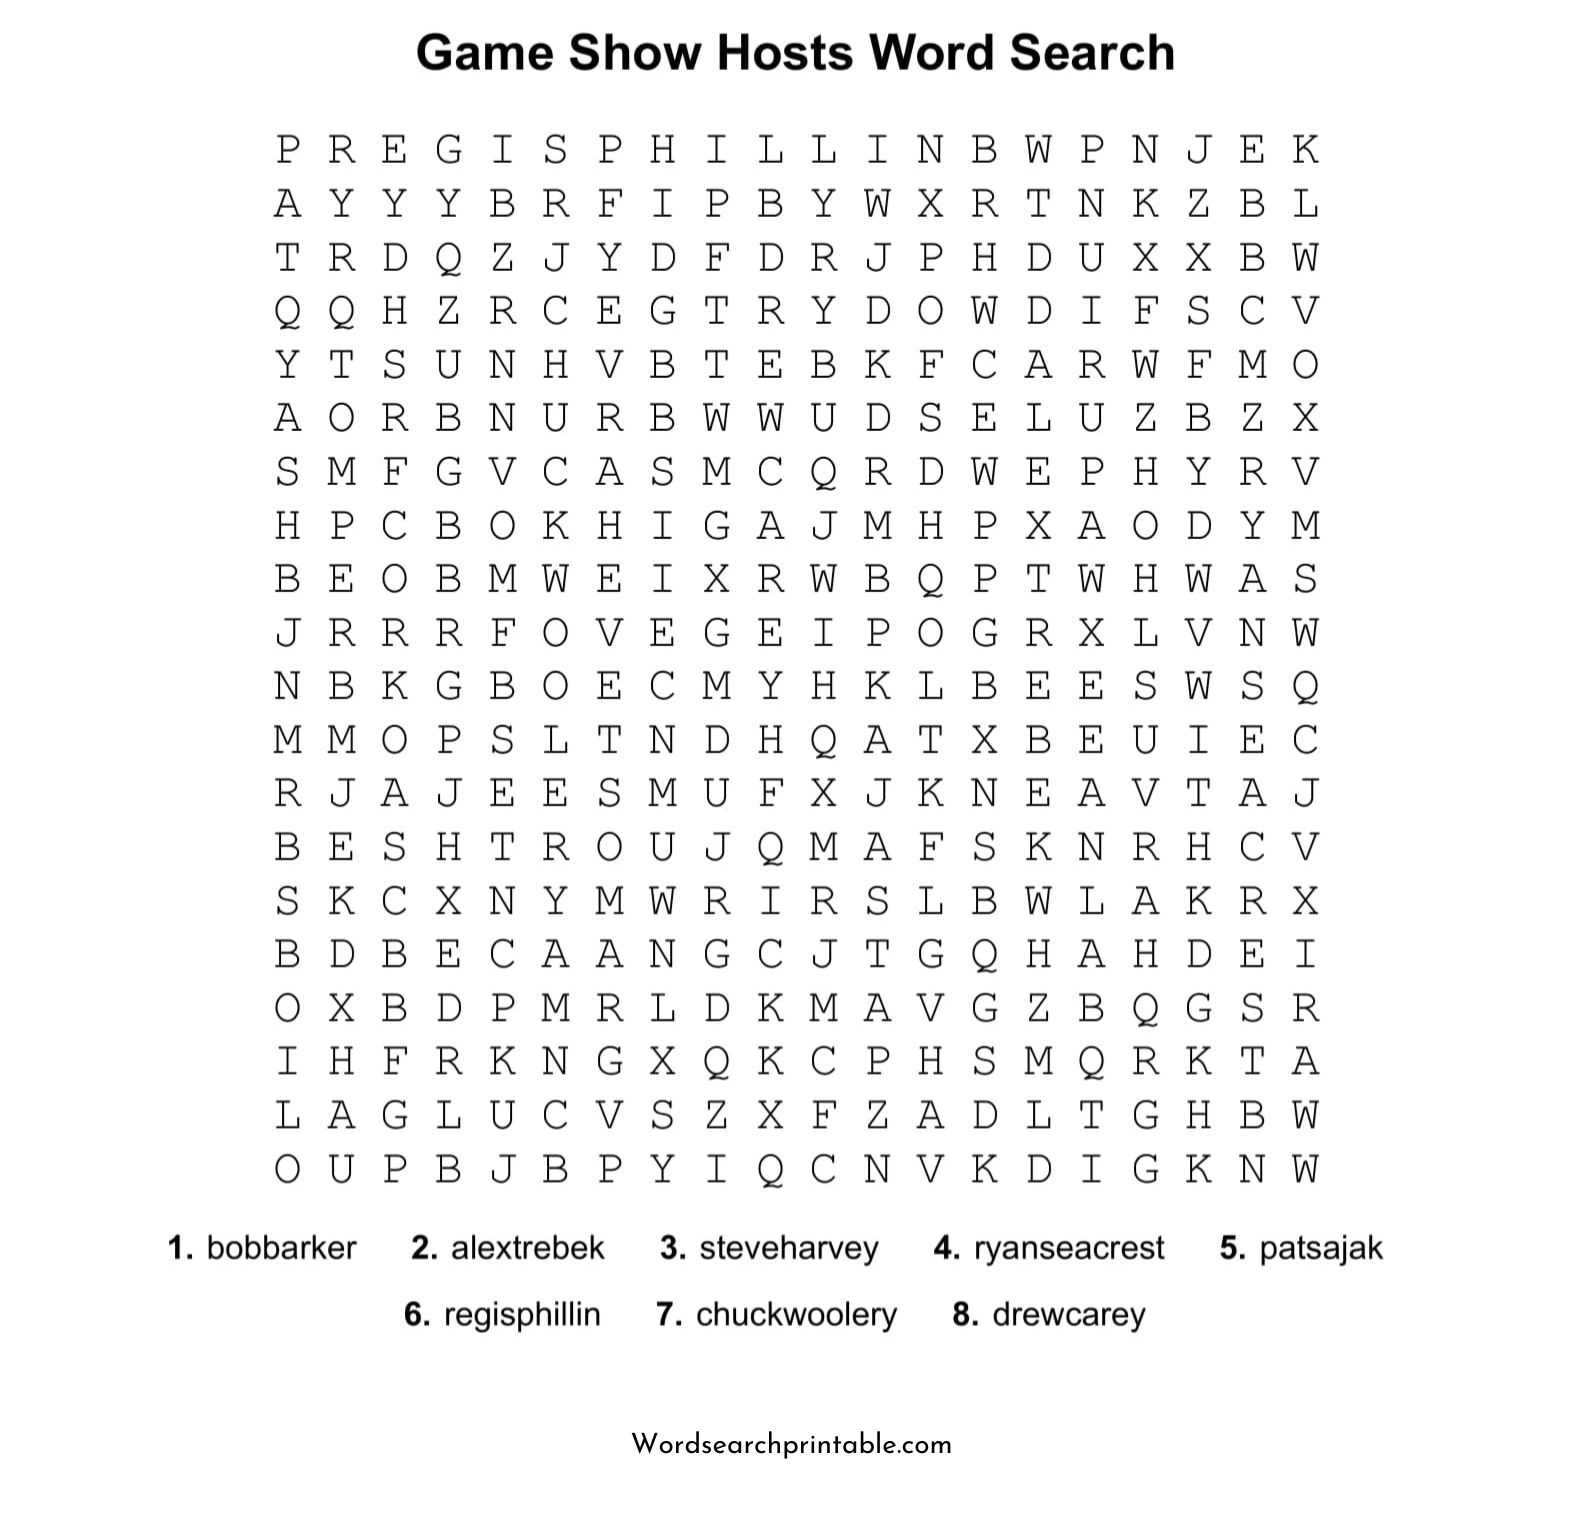 game show hosts word search puzzle